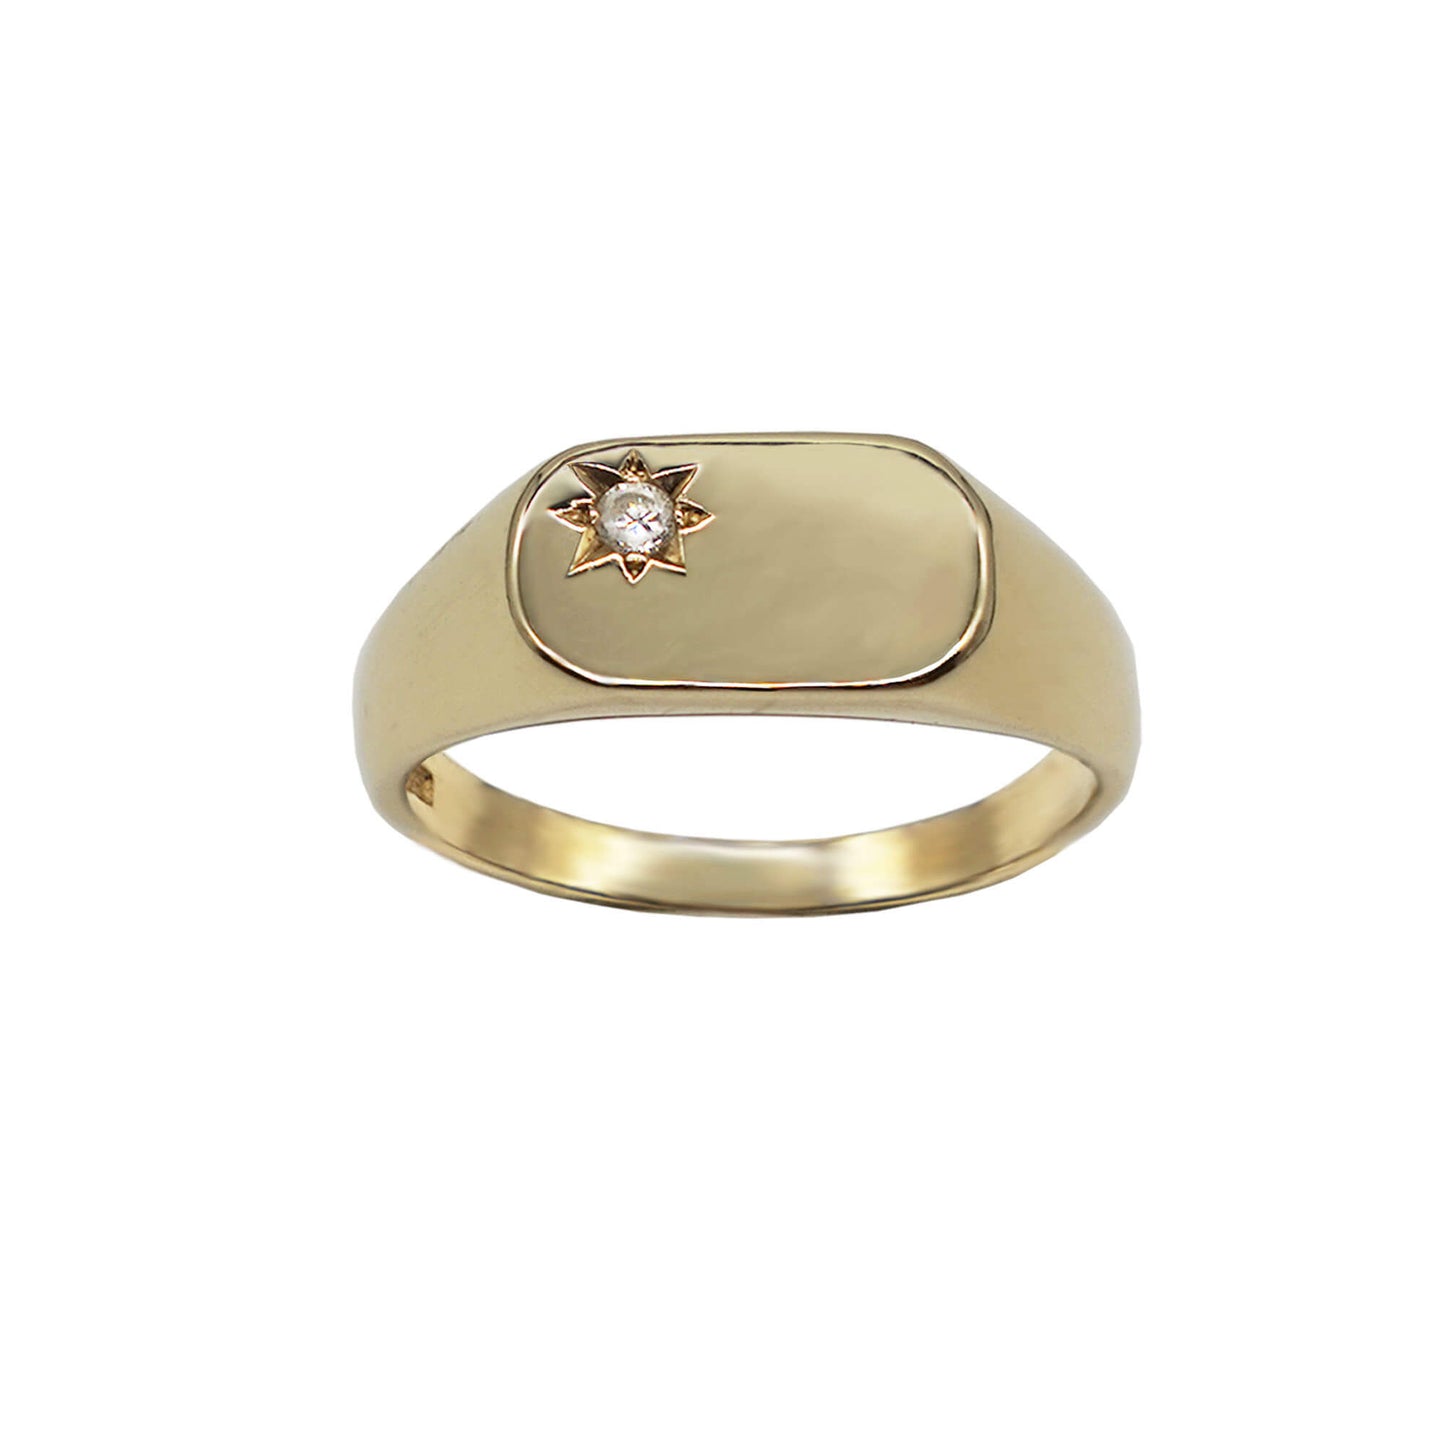 Vintage 9K Gold CZ signet ring- with smooth curved rectangle face- on white background.